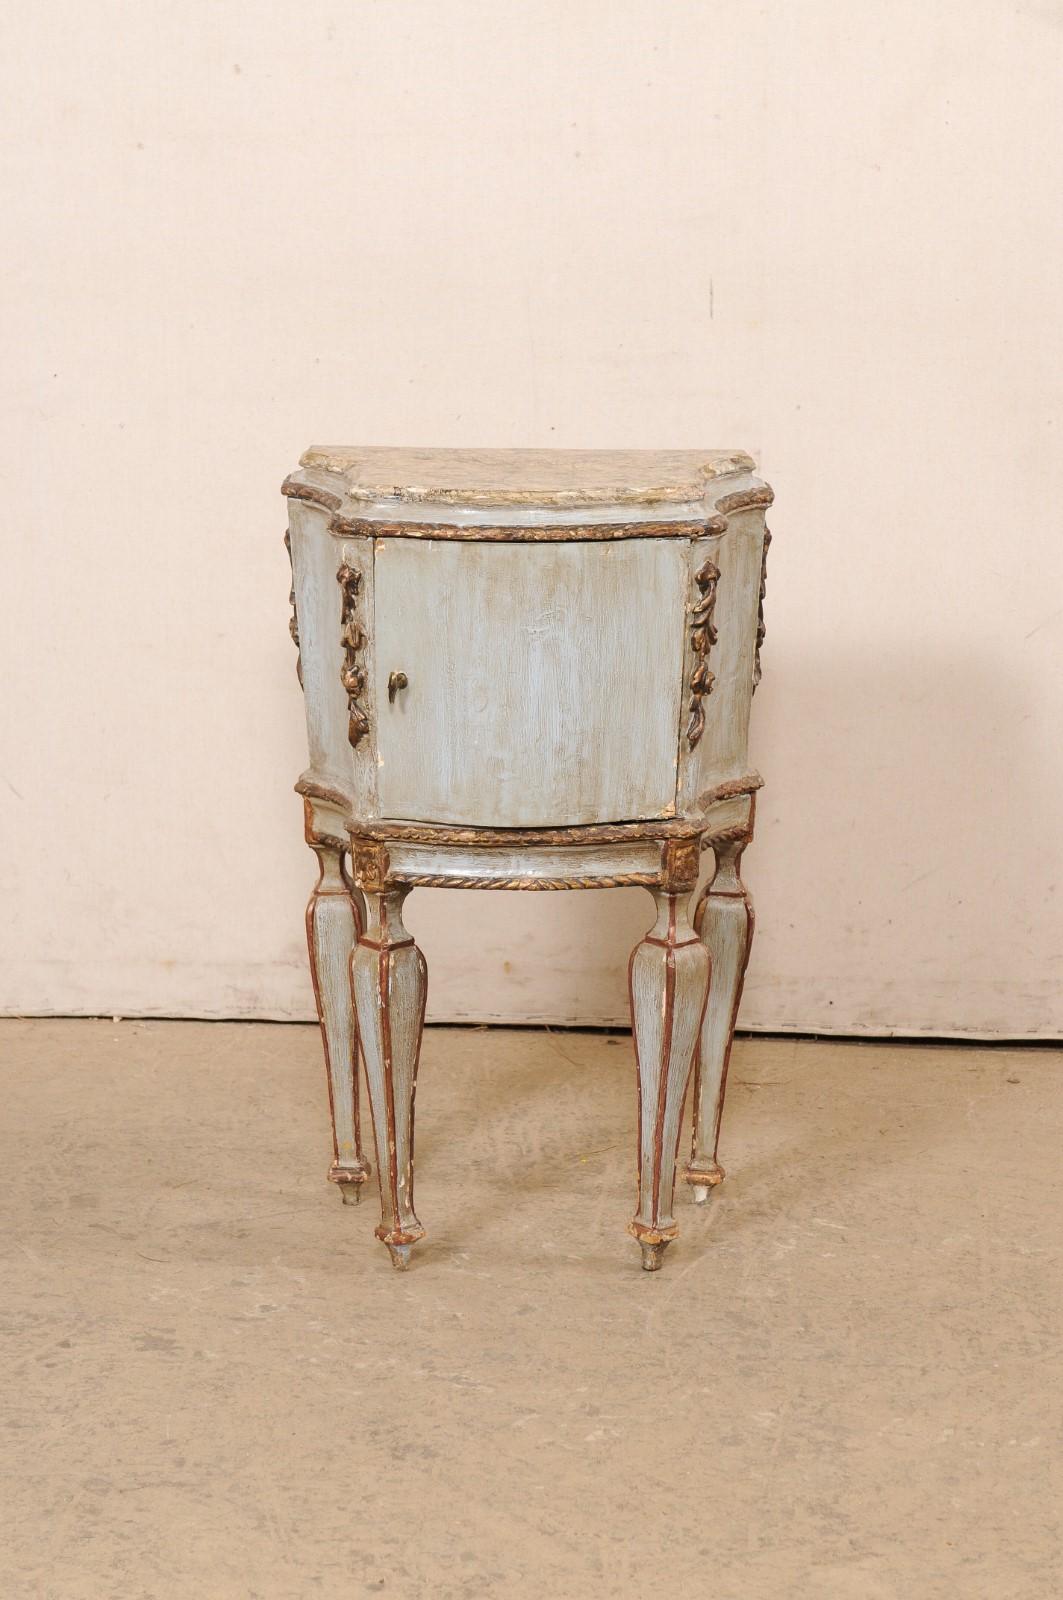 An Italian Venetian petite side chest, with faux marble top, from the turn of the 18th and 19th century. This antique small-sized commode has an artistically painted faux-marble top with a shapely bowed front, with convex sides that end in squared